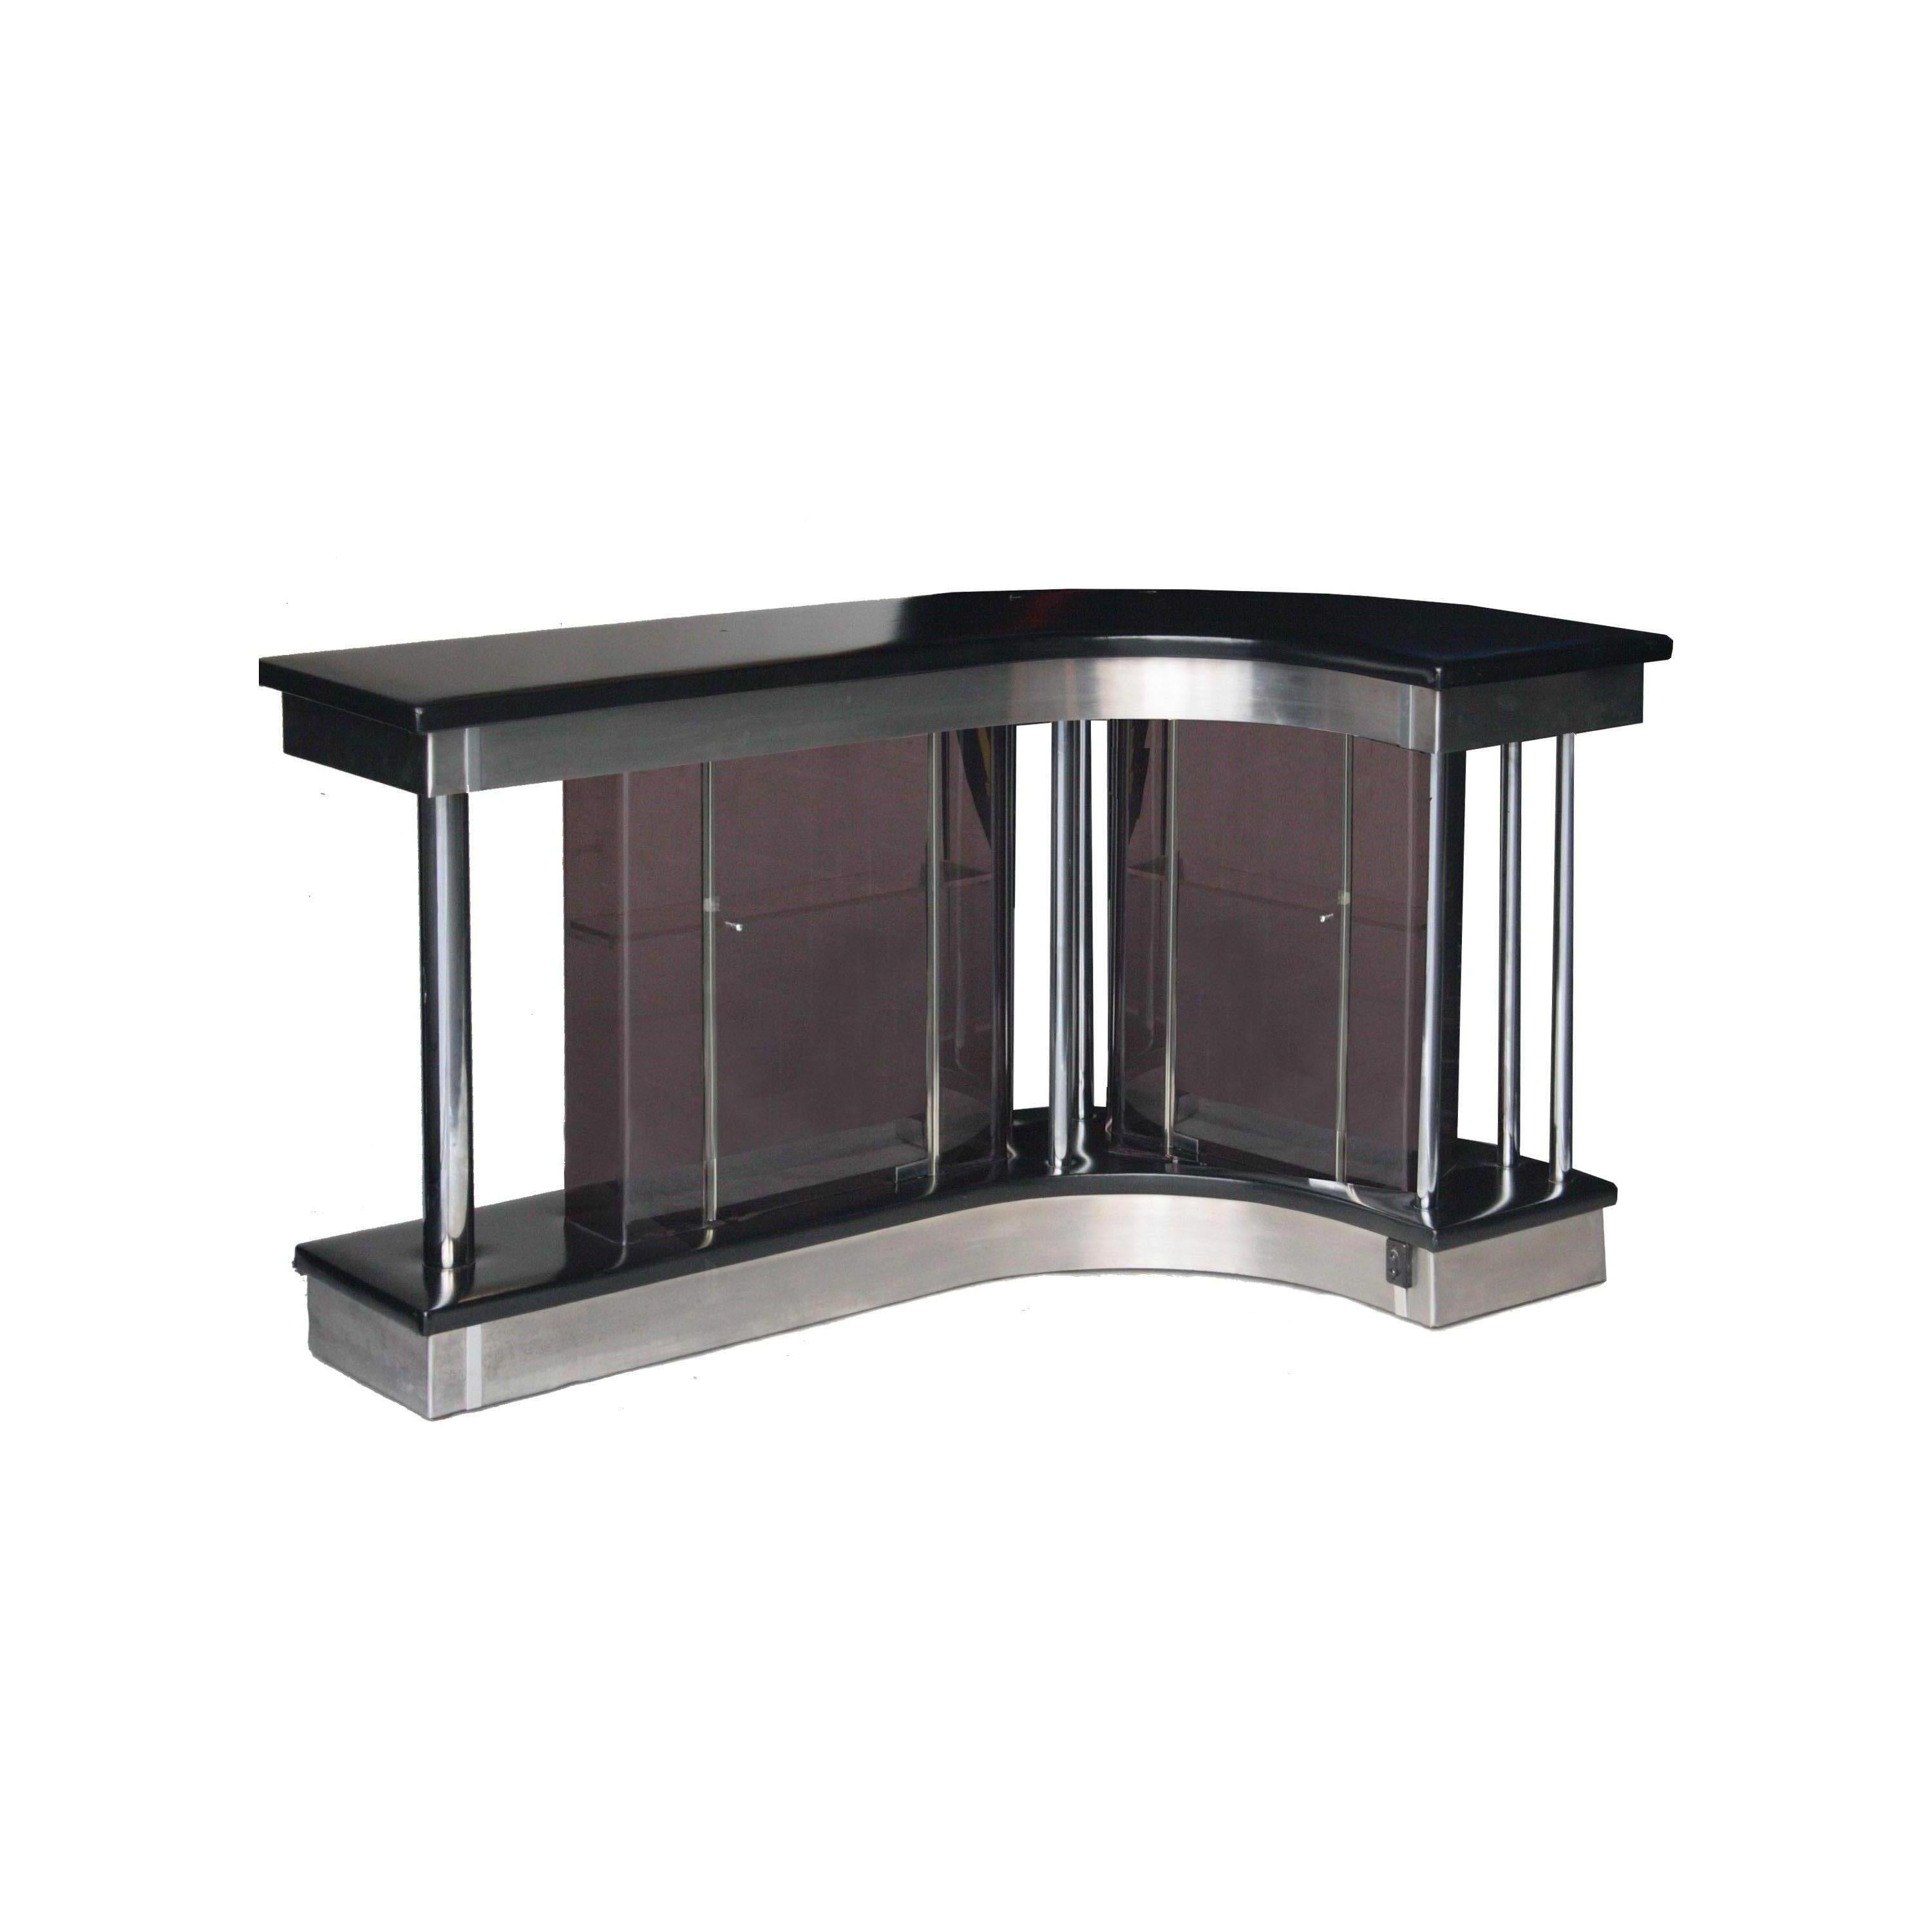 Bar set wooden structure with details in chromed steel and perplex screens. On black leather upholstery and backlit and inner bottle rack.